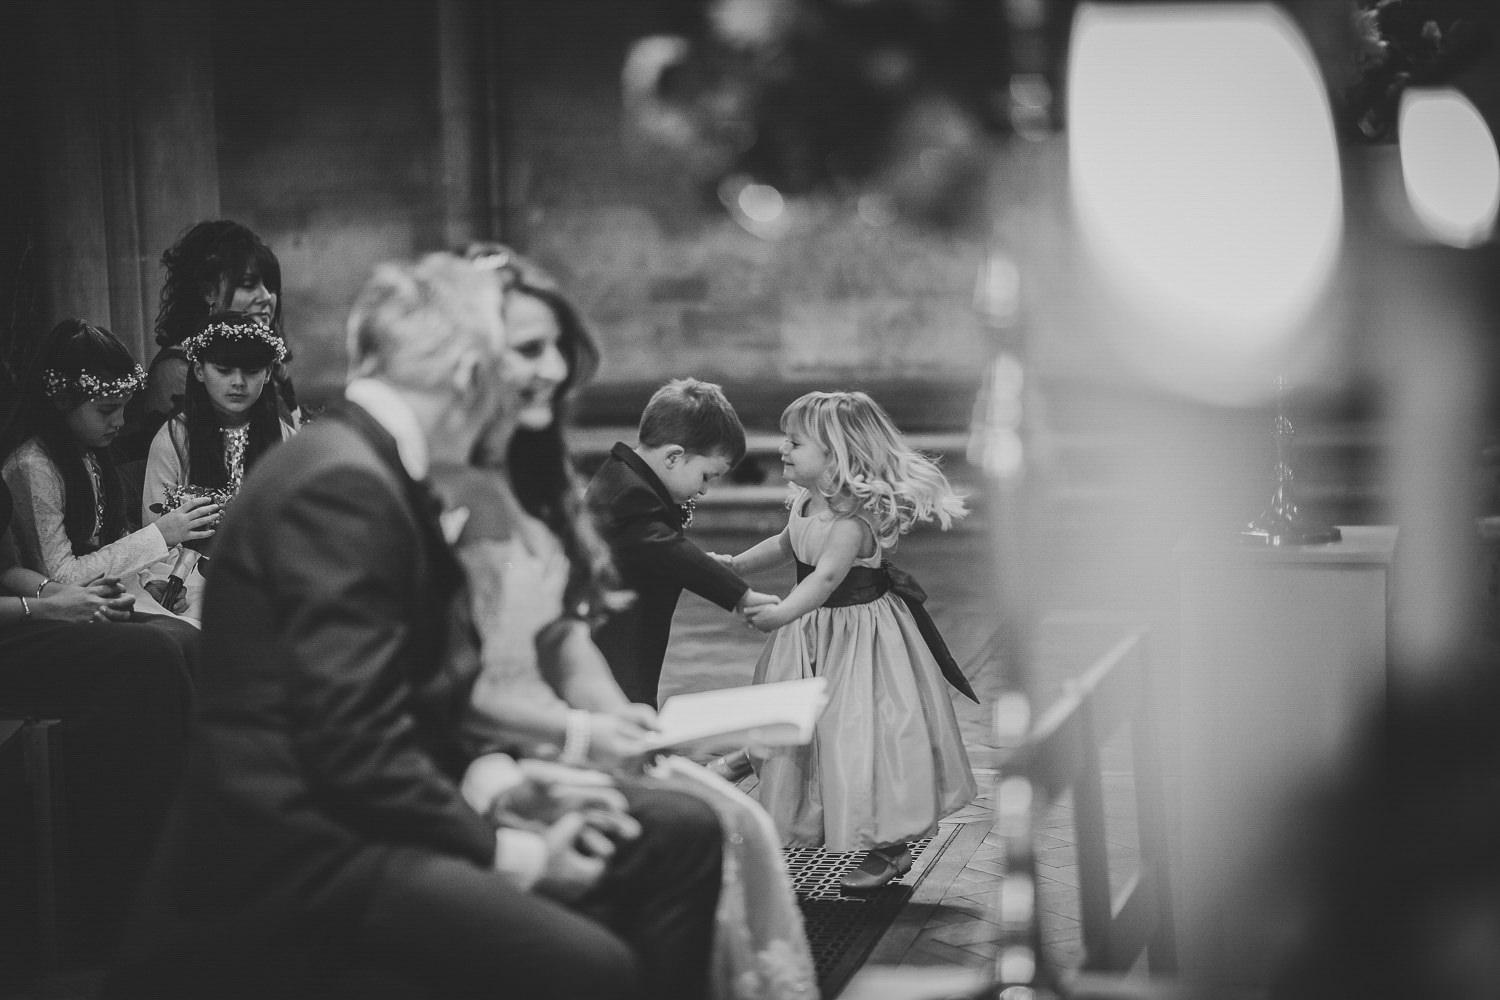 Bride and groom in church, page boy and flower girl dancing in the back ground